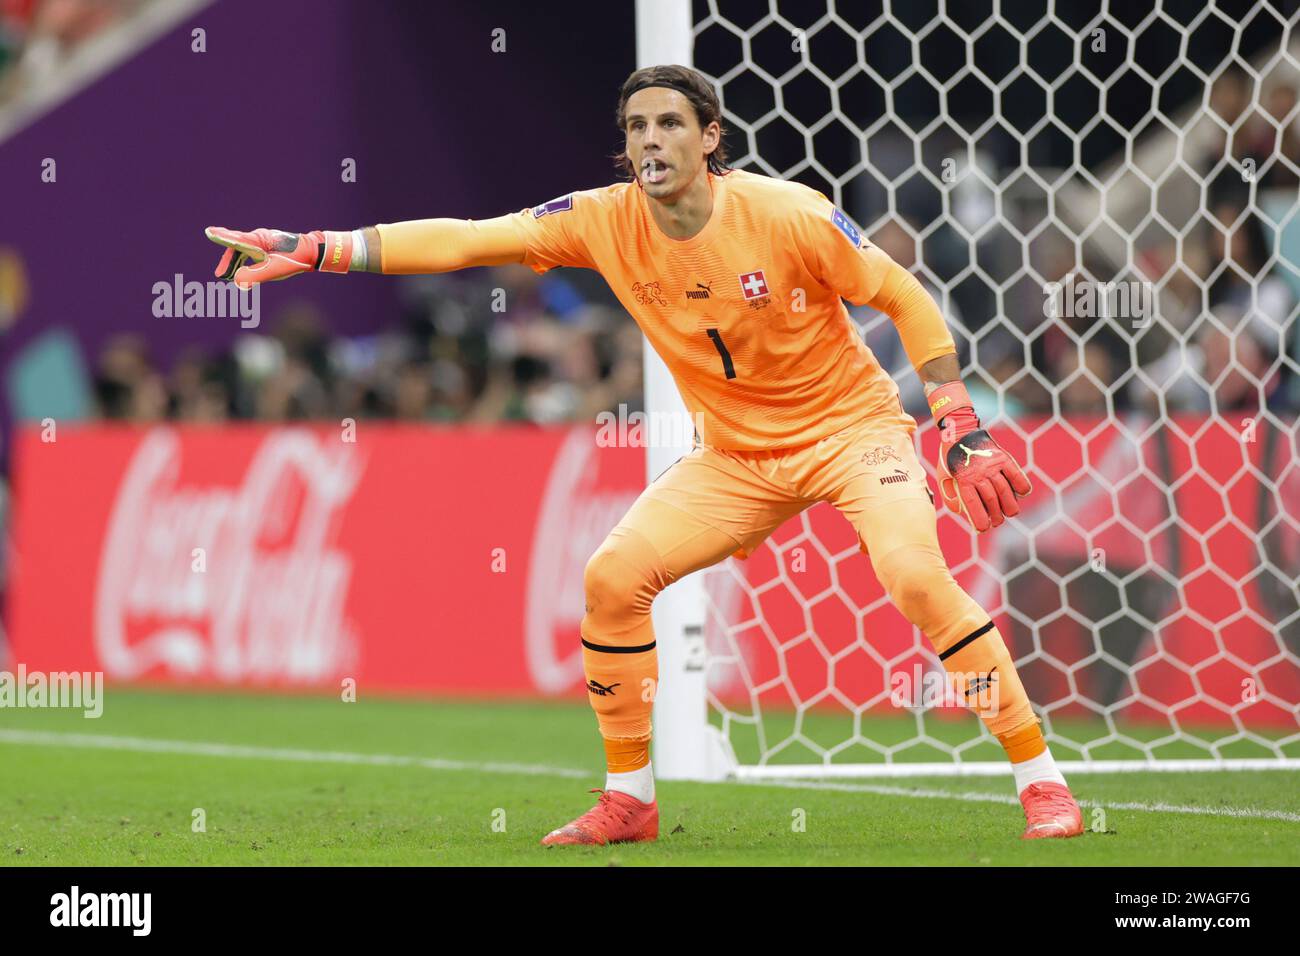 Qatar, Qatar. 06th Dec, 2022. Yann Sommer of Switzerland seen in action during the FIFA World Cup Qatar 2022 match between Portugal and Switzerland at Lusail Stadium. Final score: Portugal 6:1 Switzerland. (Photo by Grzegorz Wajda/SOPA Images/Sipa USA) Credit: Sipa USA/Alamy Live News Stock Photo